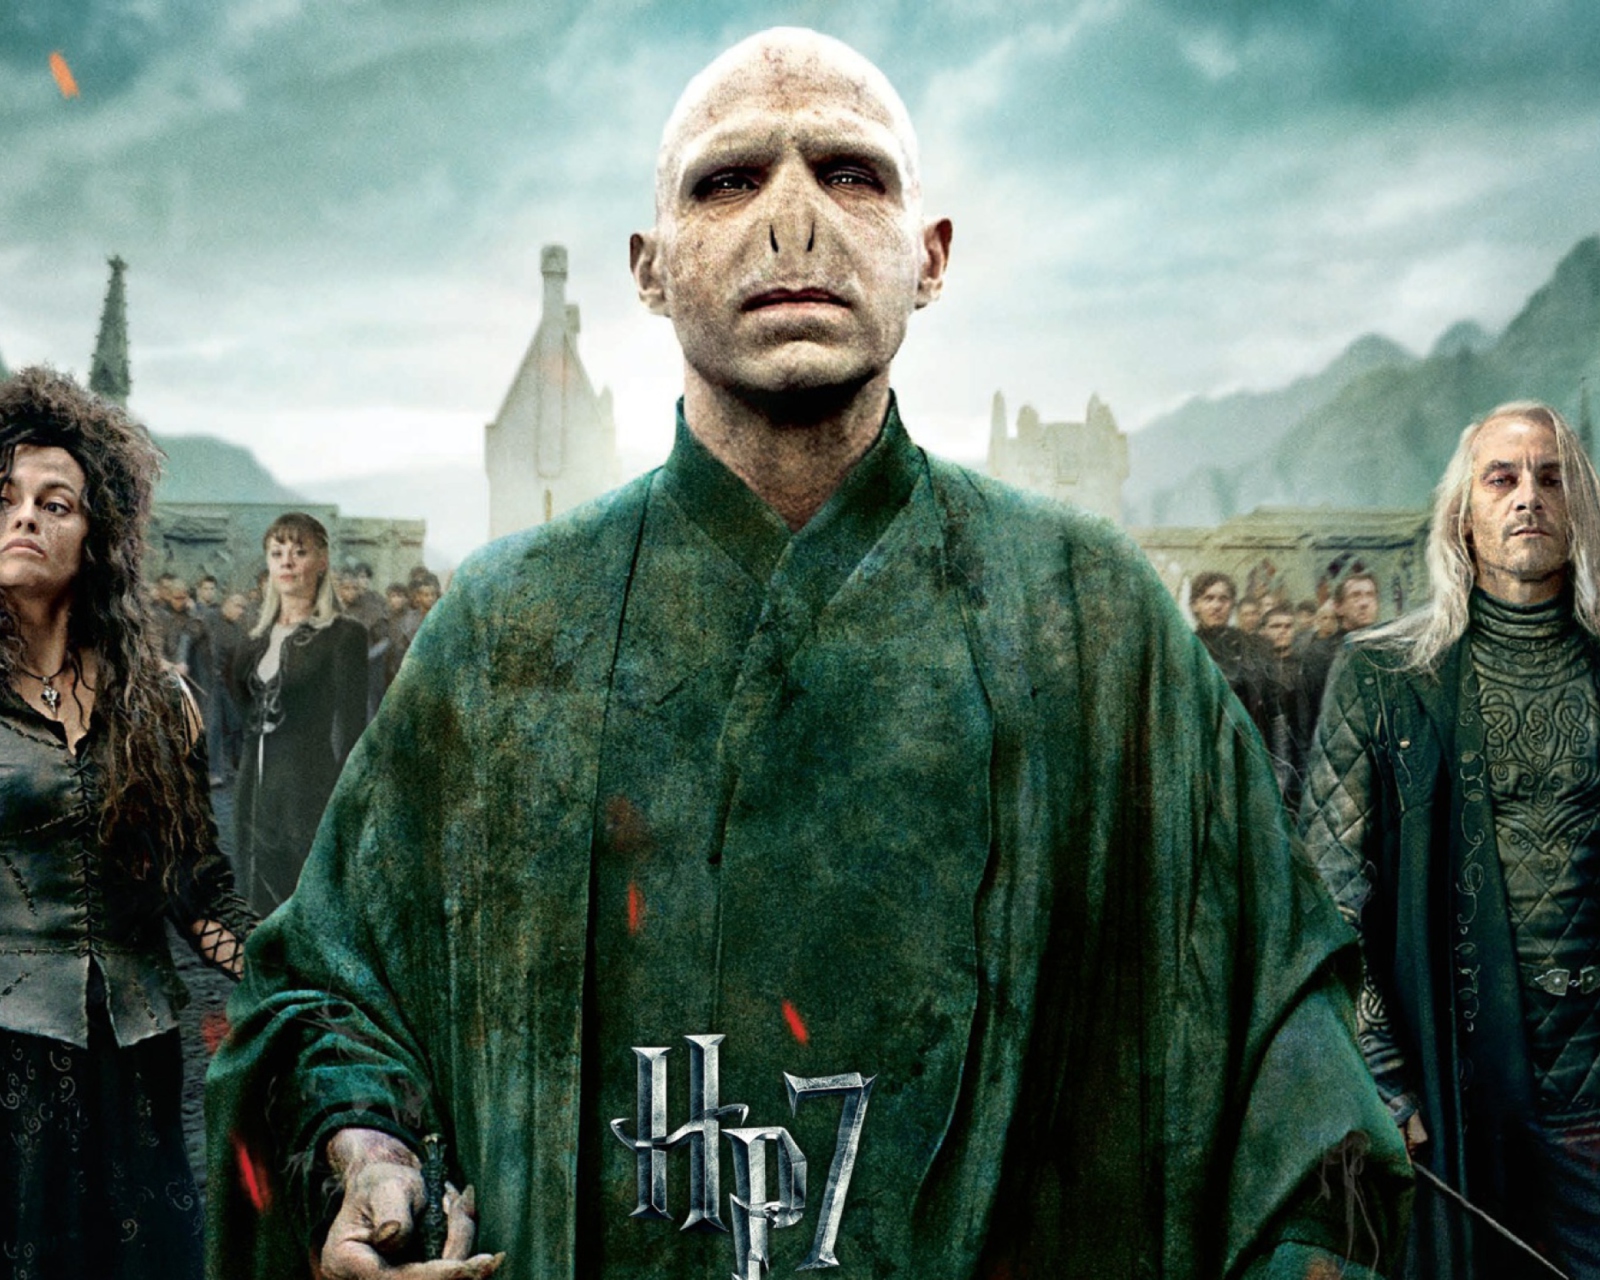 Das Harry Potter And The Deathly Hallows Part 2 Wallpaper 1600x1280